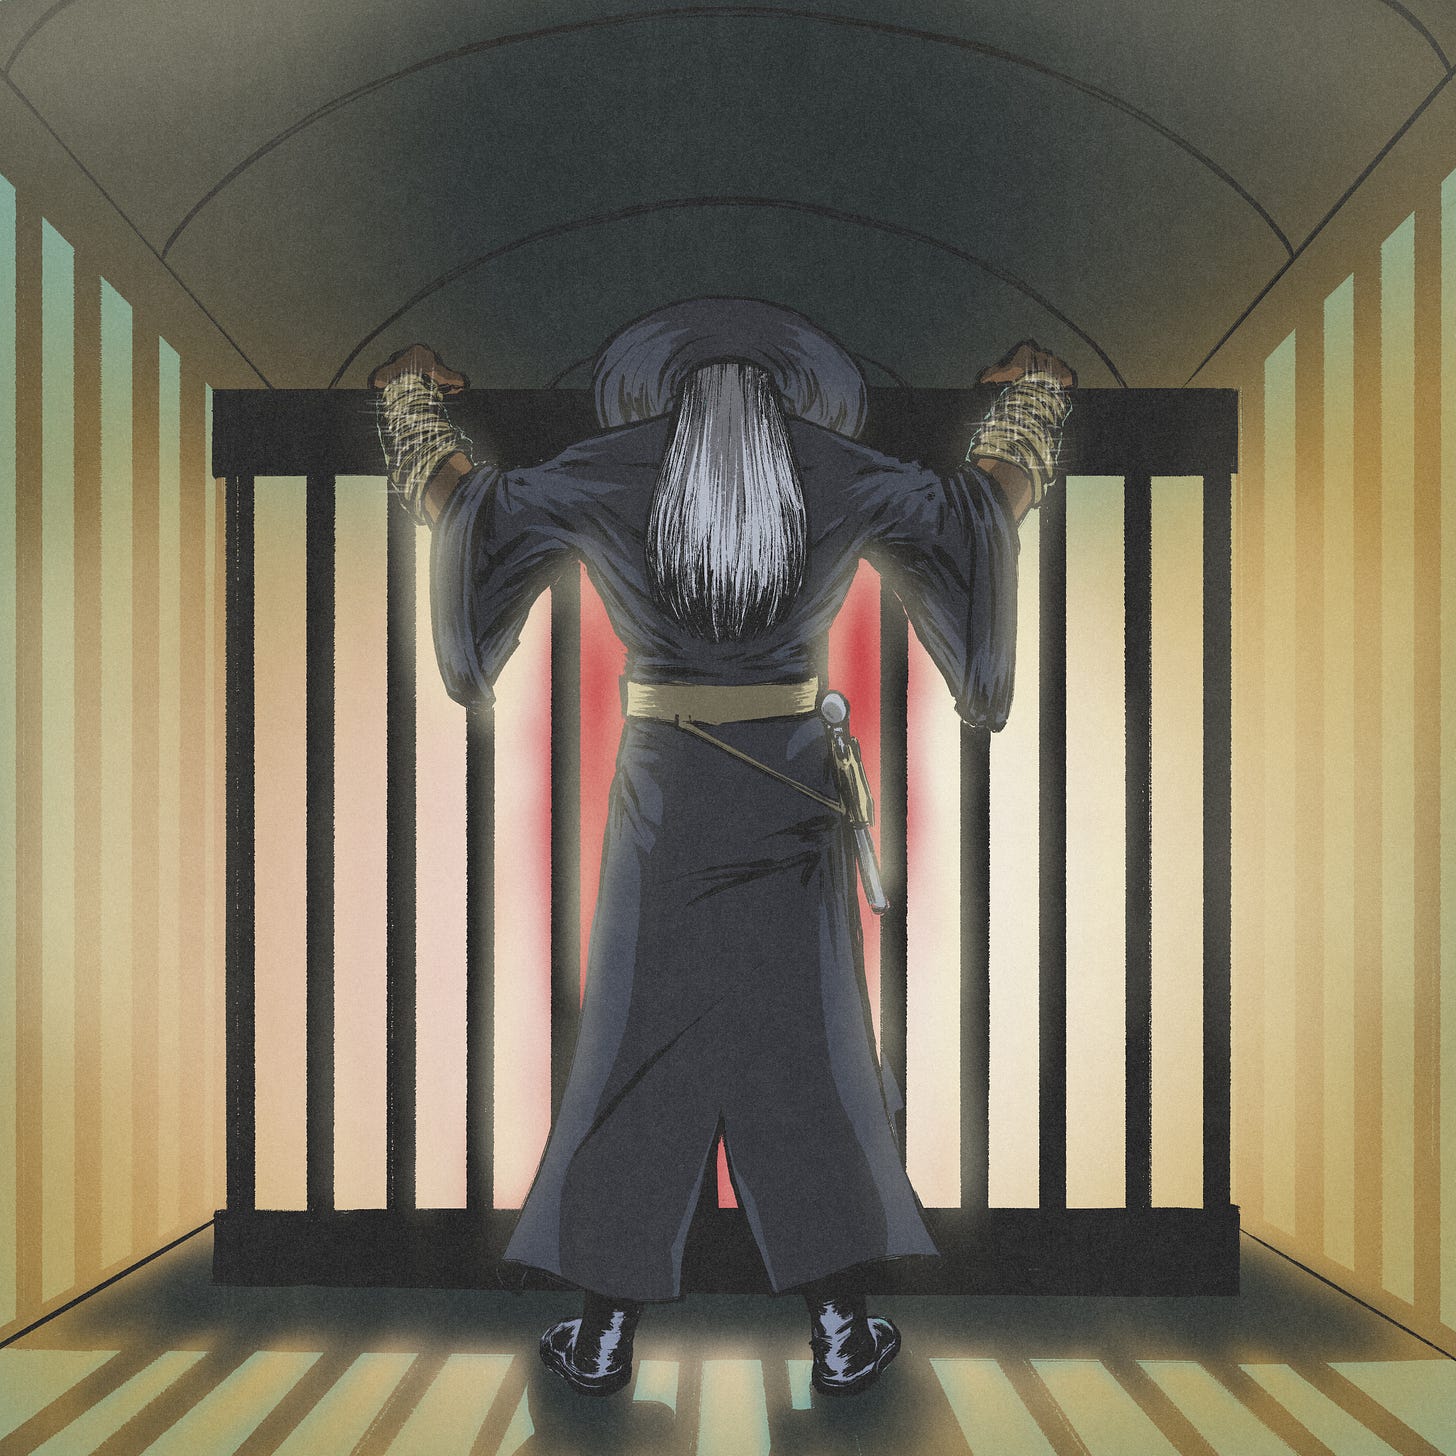 An illustration of a mage trying to strengthen the bars of a cage by magical means.